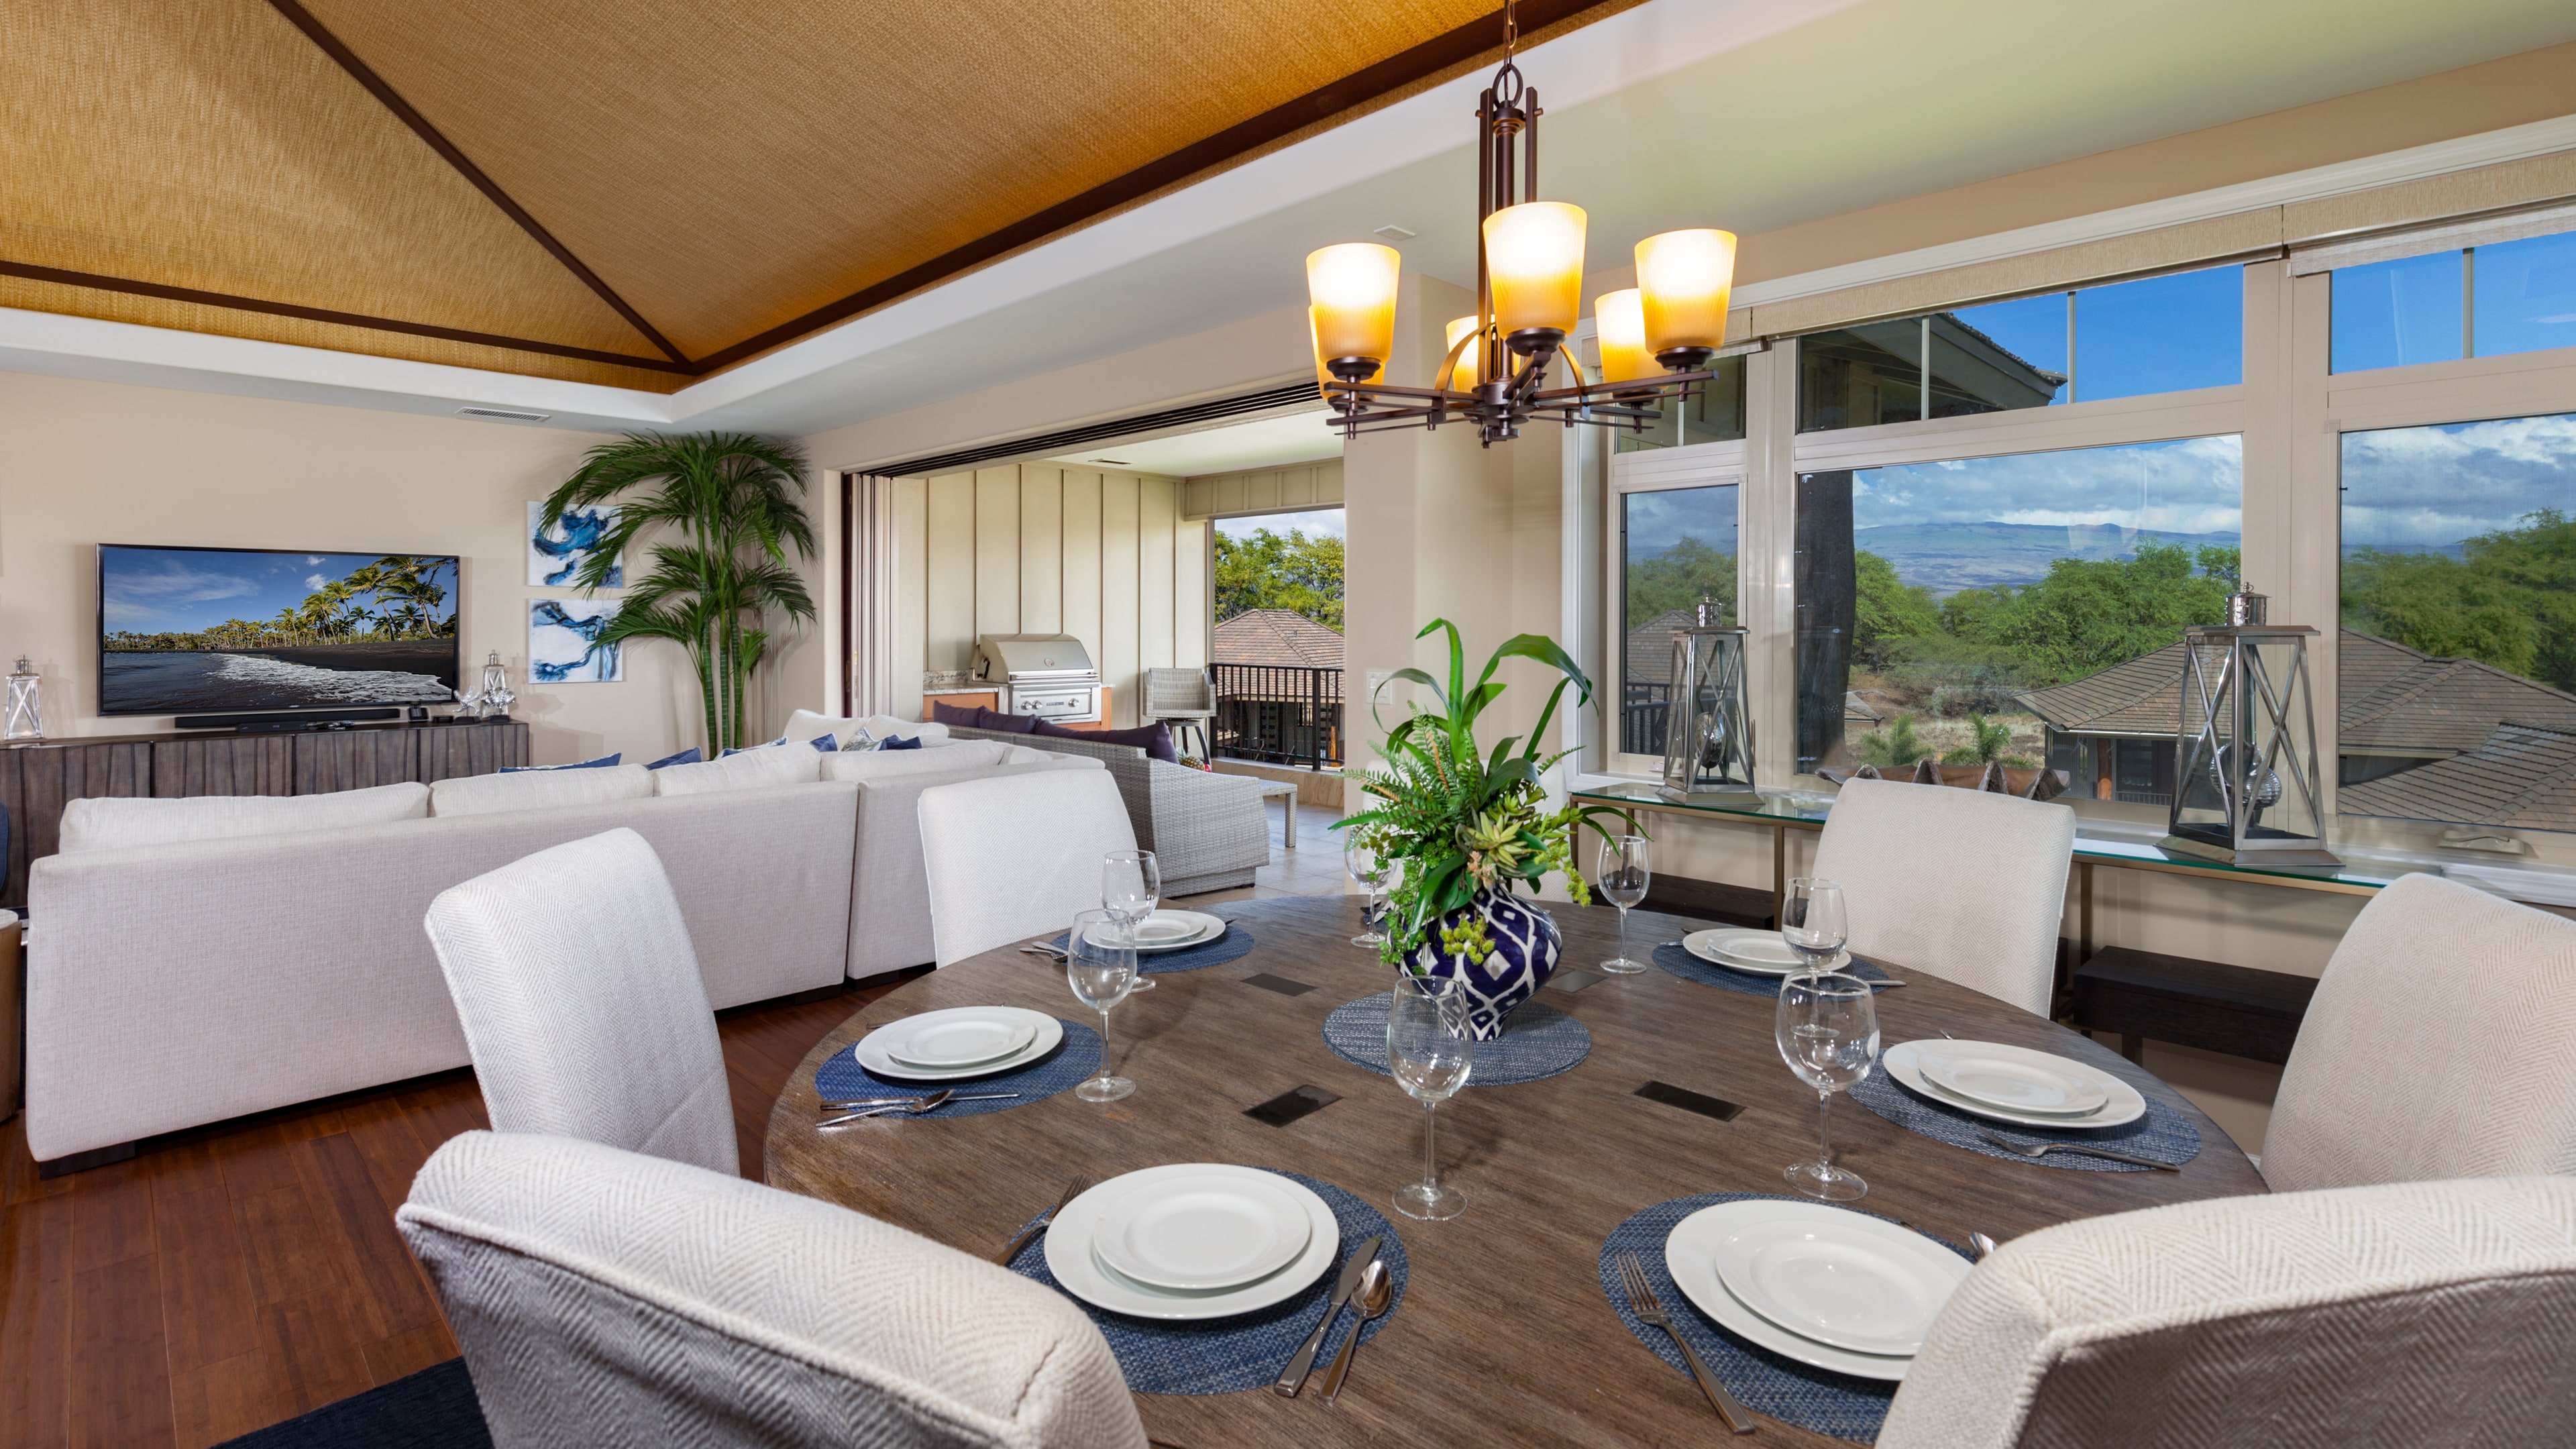 Dining Room - seating for 8 plus 4 at island plus outdoor on lanai